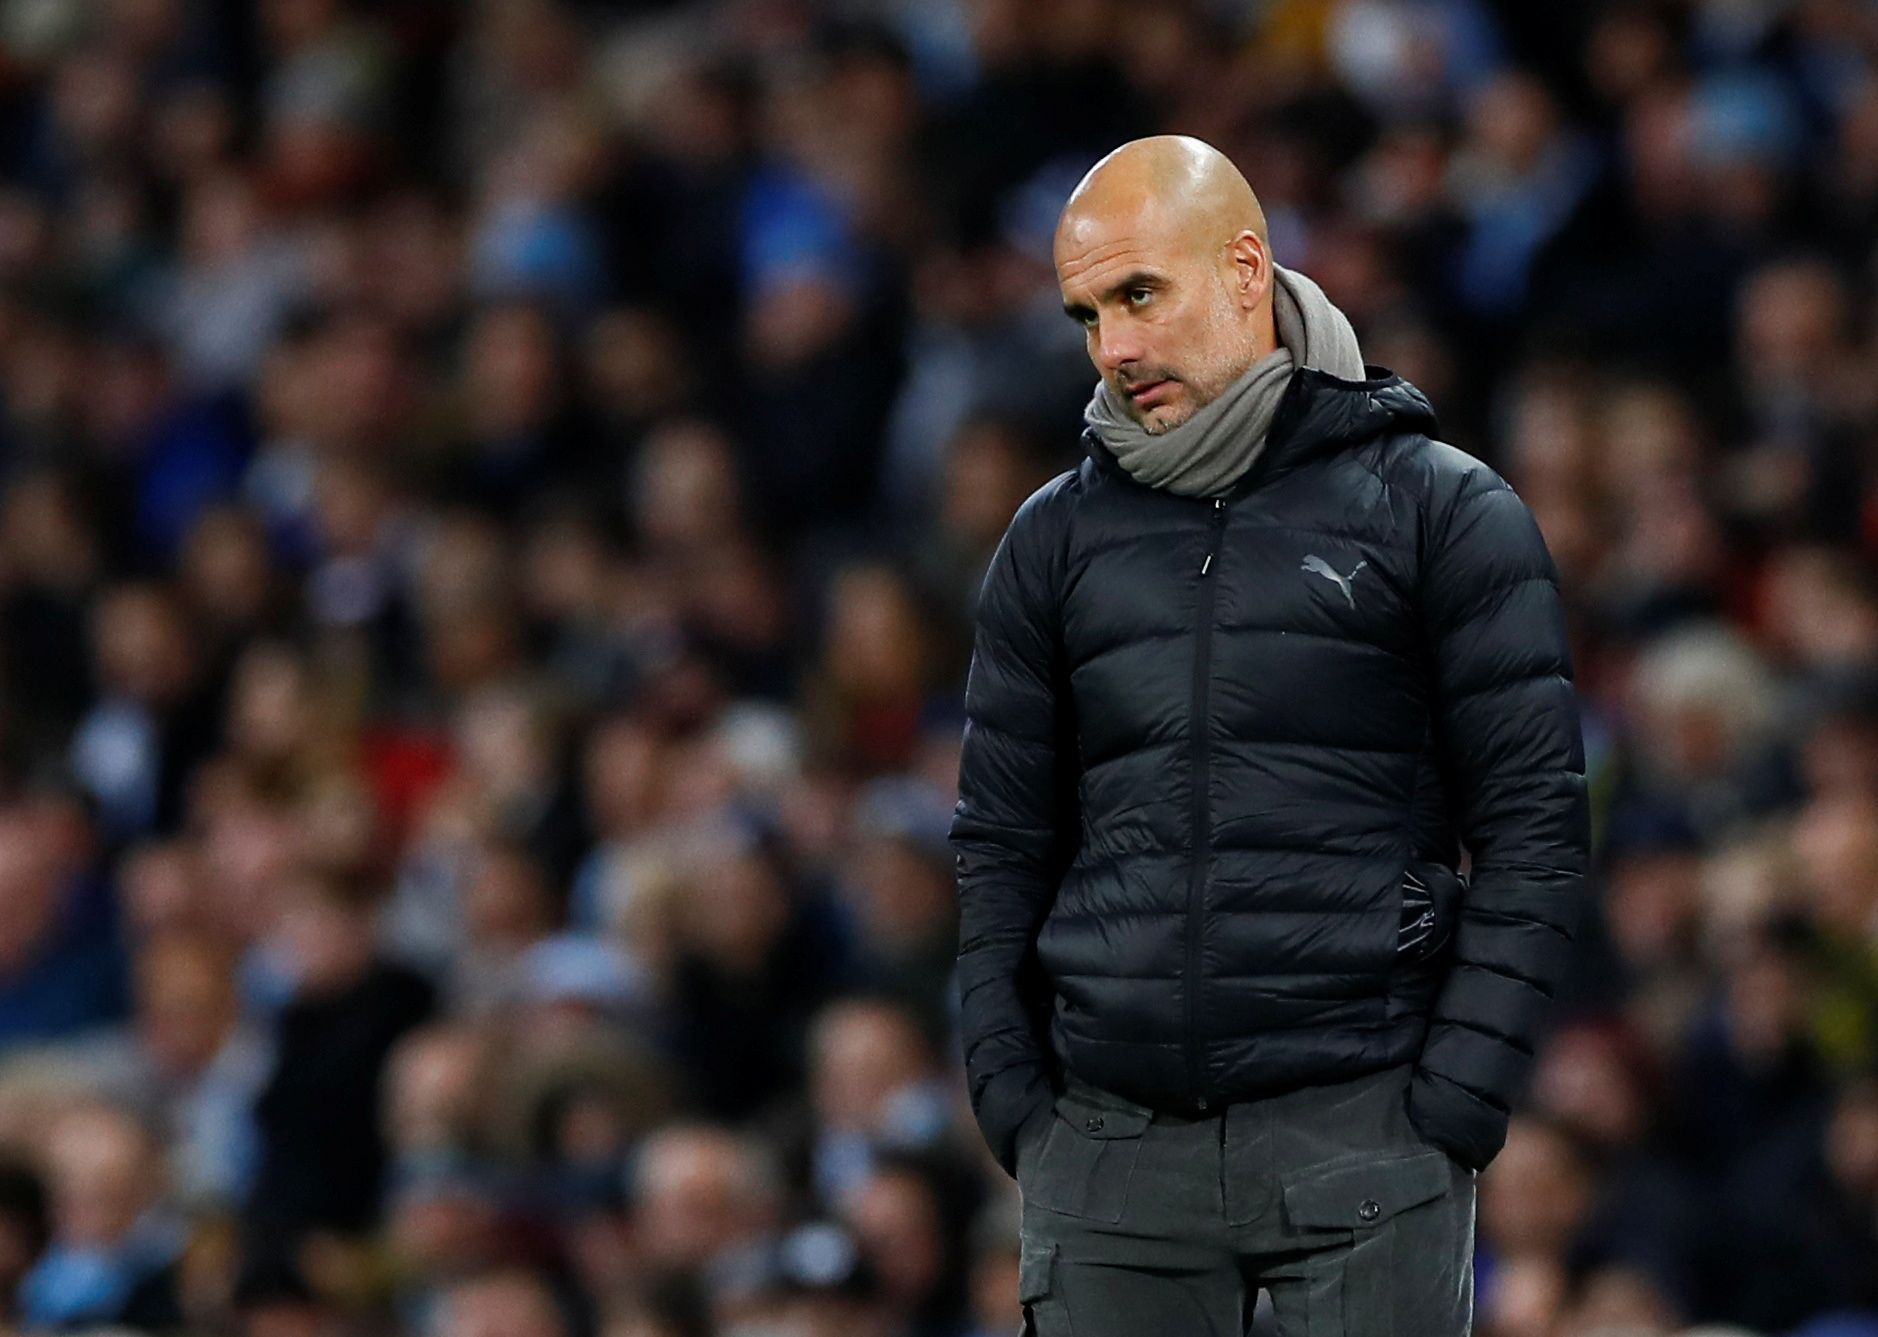 Soccer Football - Carabao Cup - Fourth Round - Manchester City v Southampton - Etihad Stadium, Manchester, Britain - October 29, 2019  Manchester City manager Pep Guardiola     Action Images via Reuters/Jason Cairnduff  EDITORIAL USE ONLY. No use with unauthorized audio, video, data, fixture lists, club/league logos or 